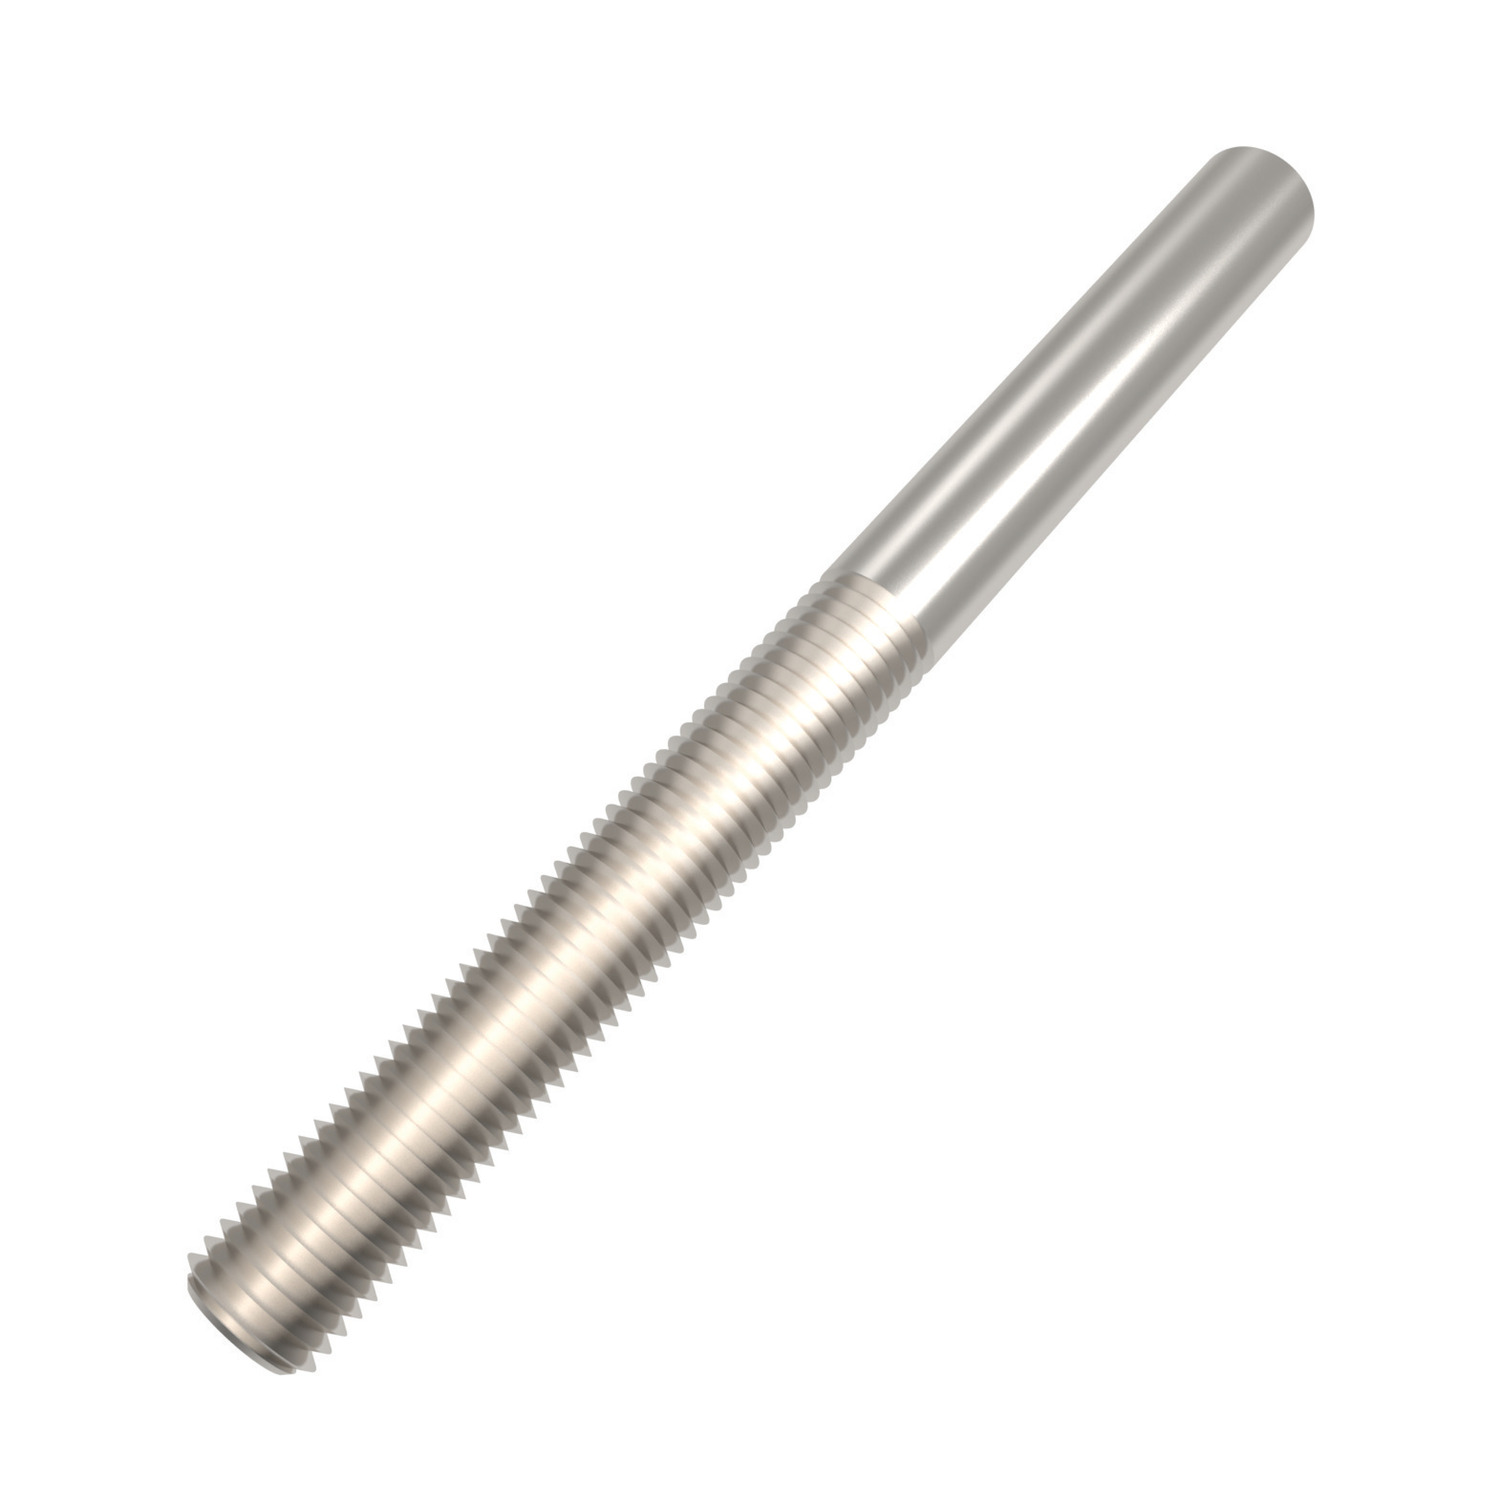 R3868.R014-A4 Welding Studs RH M14 A4 s/s Not to be used for lifting unless SWL marked.